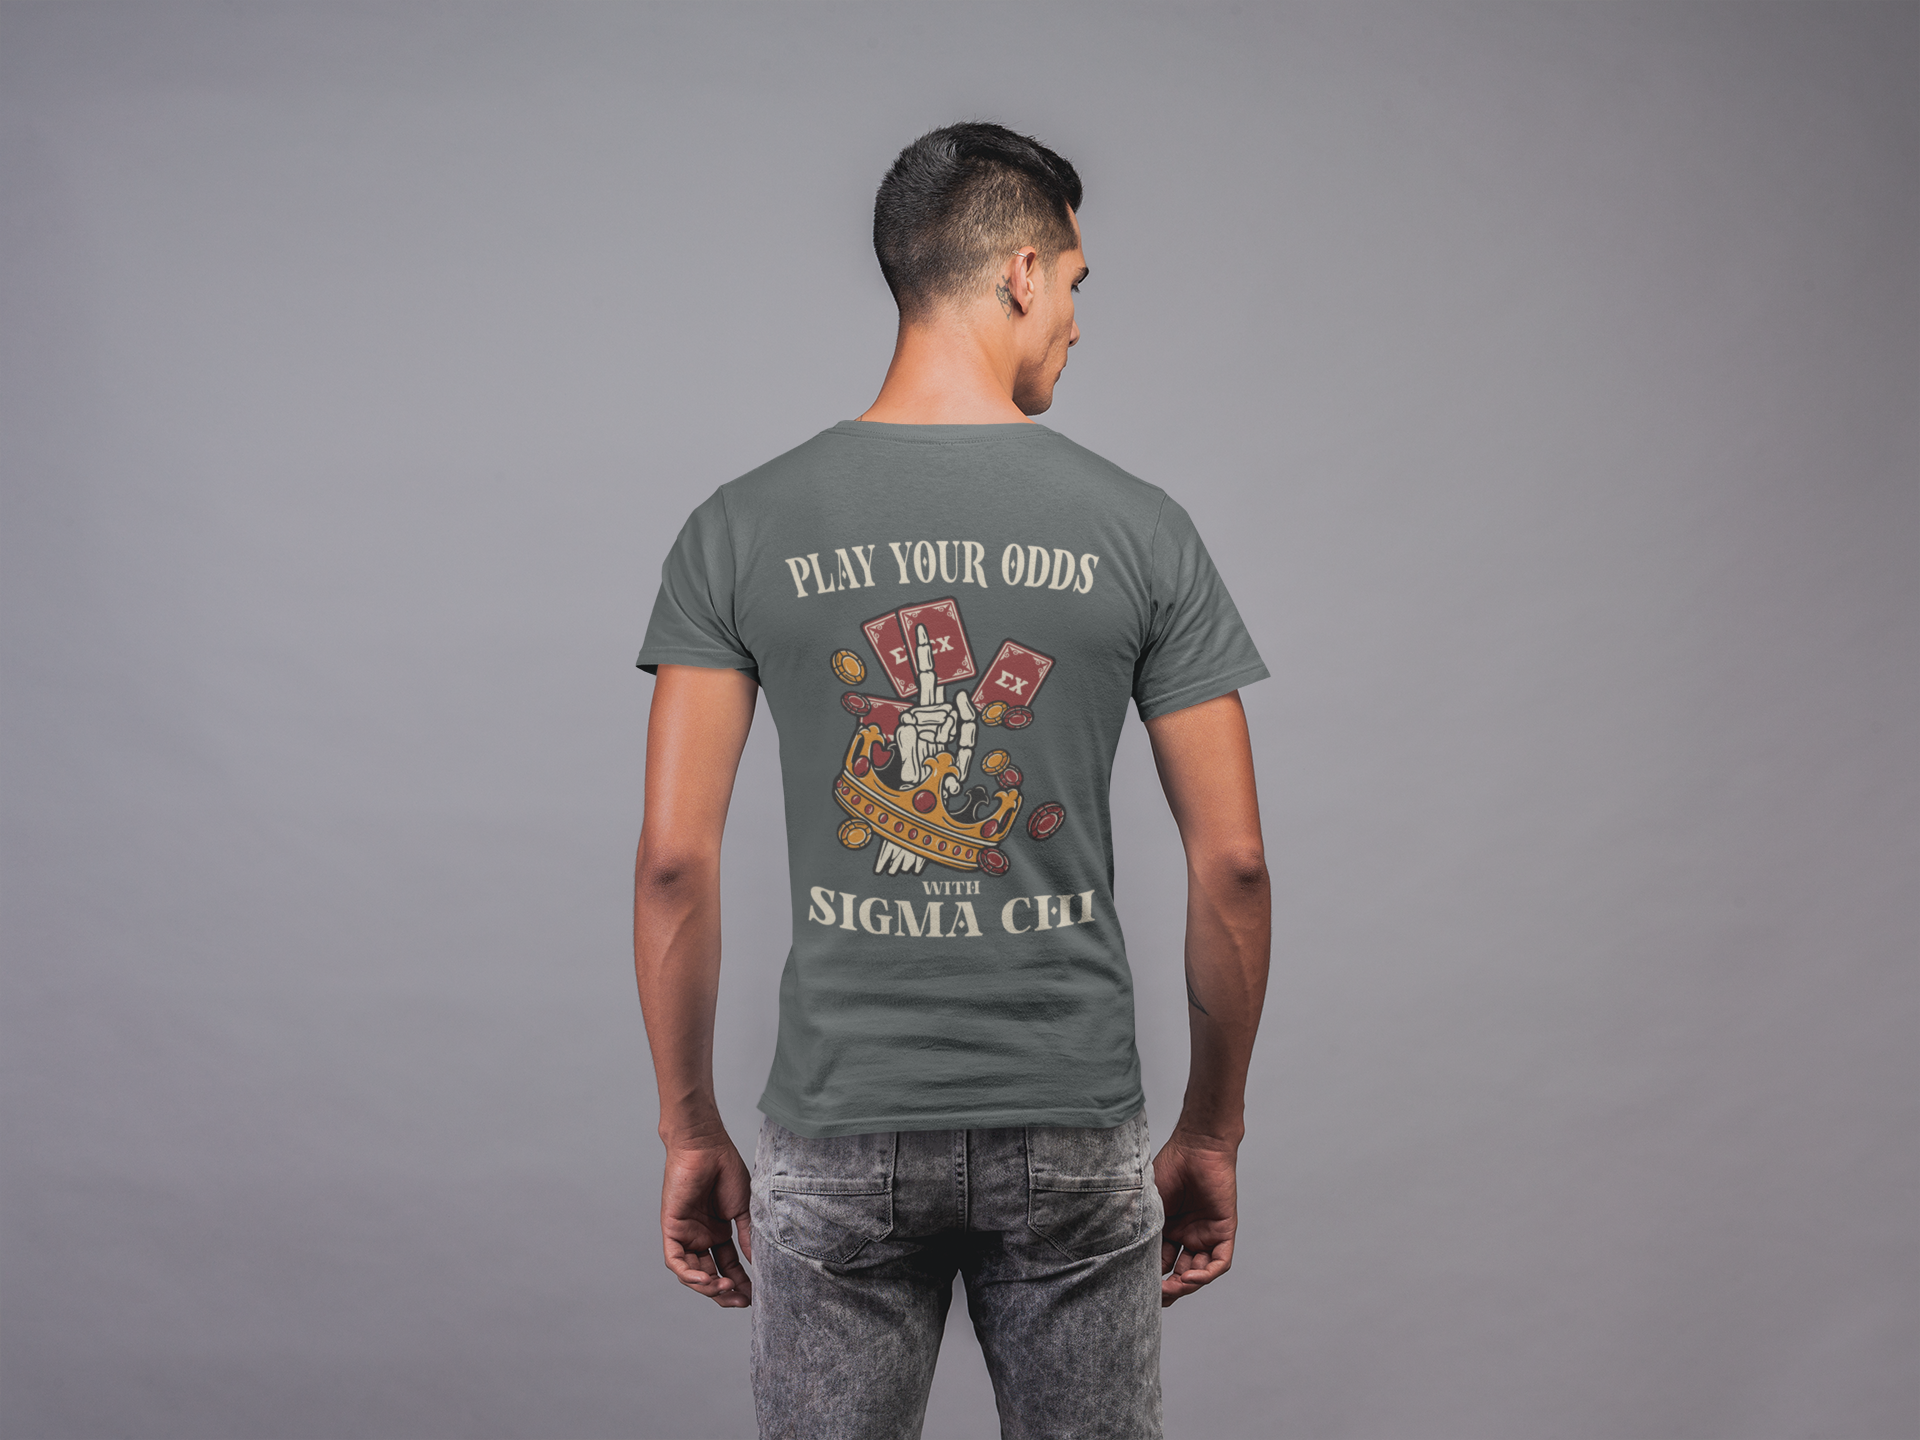 Sigma Chi Graphic T-Shirt | Play Your Odds | Sigma Chi Fraternity Merch House back model